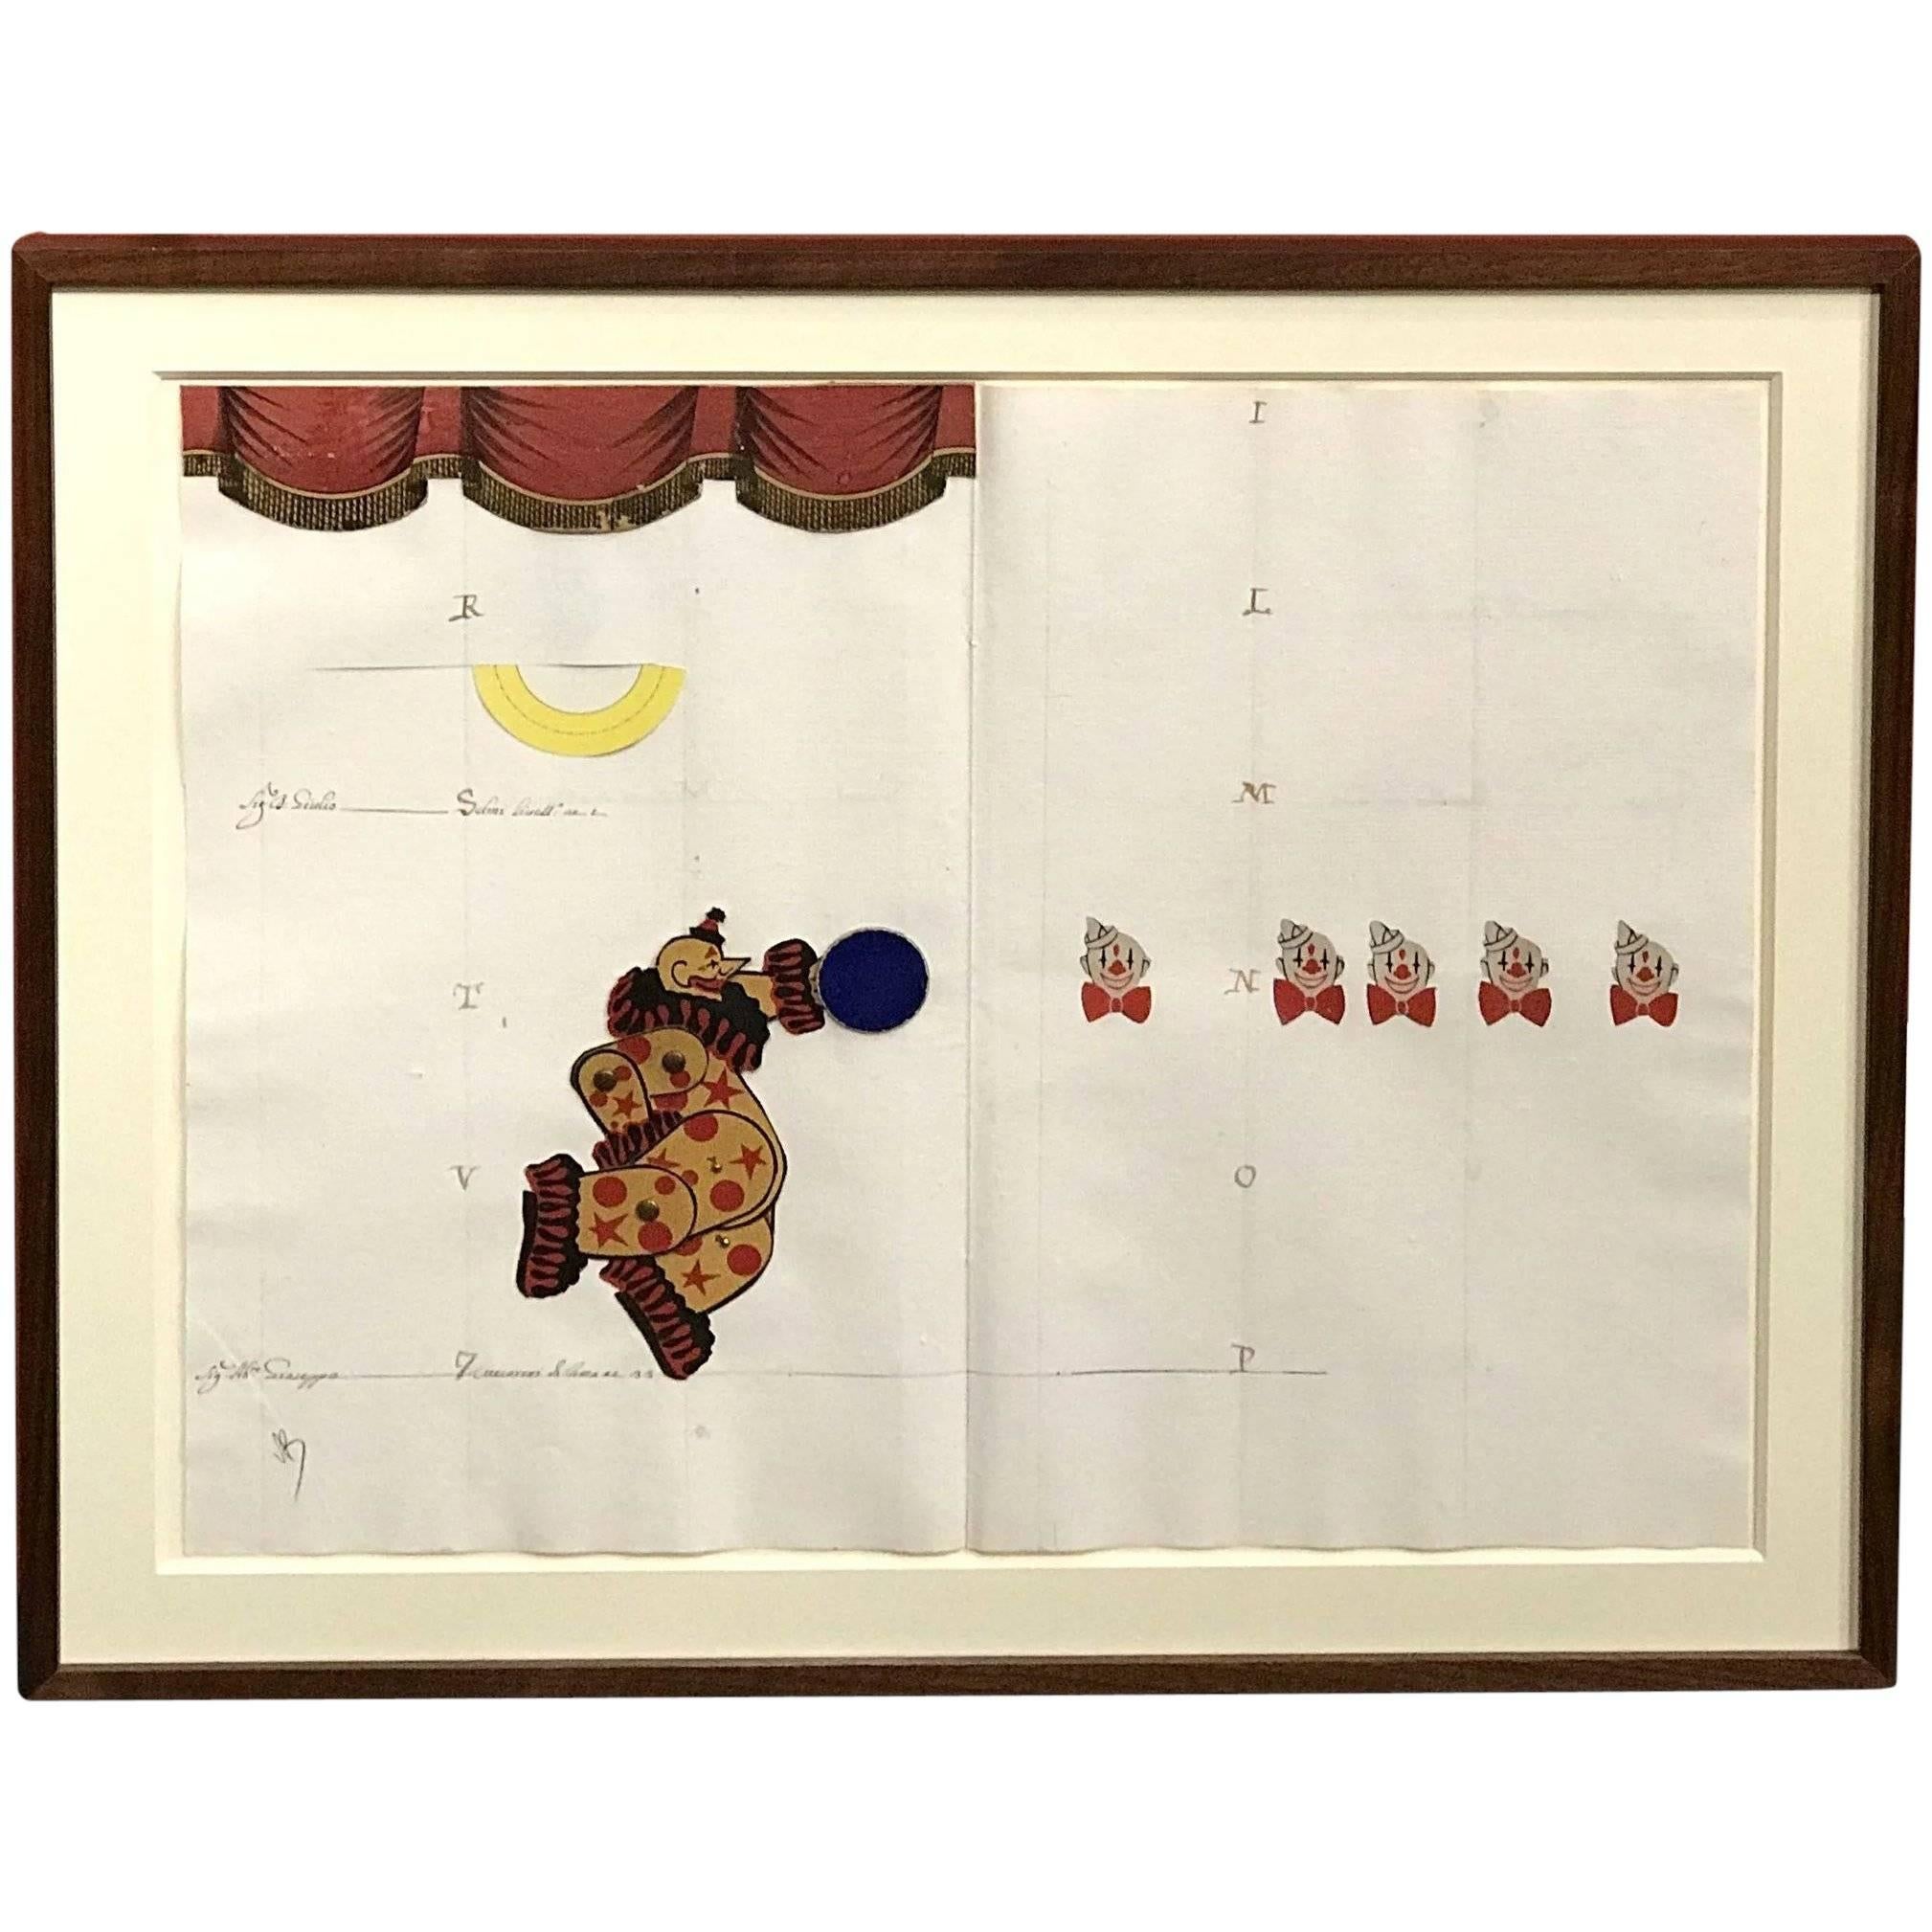 Framed Paper Collage With Clowns - Mixed Media Art by Varujan Boghosian